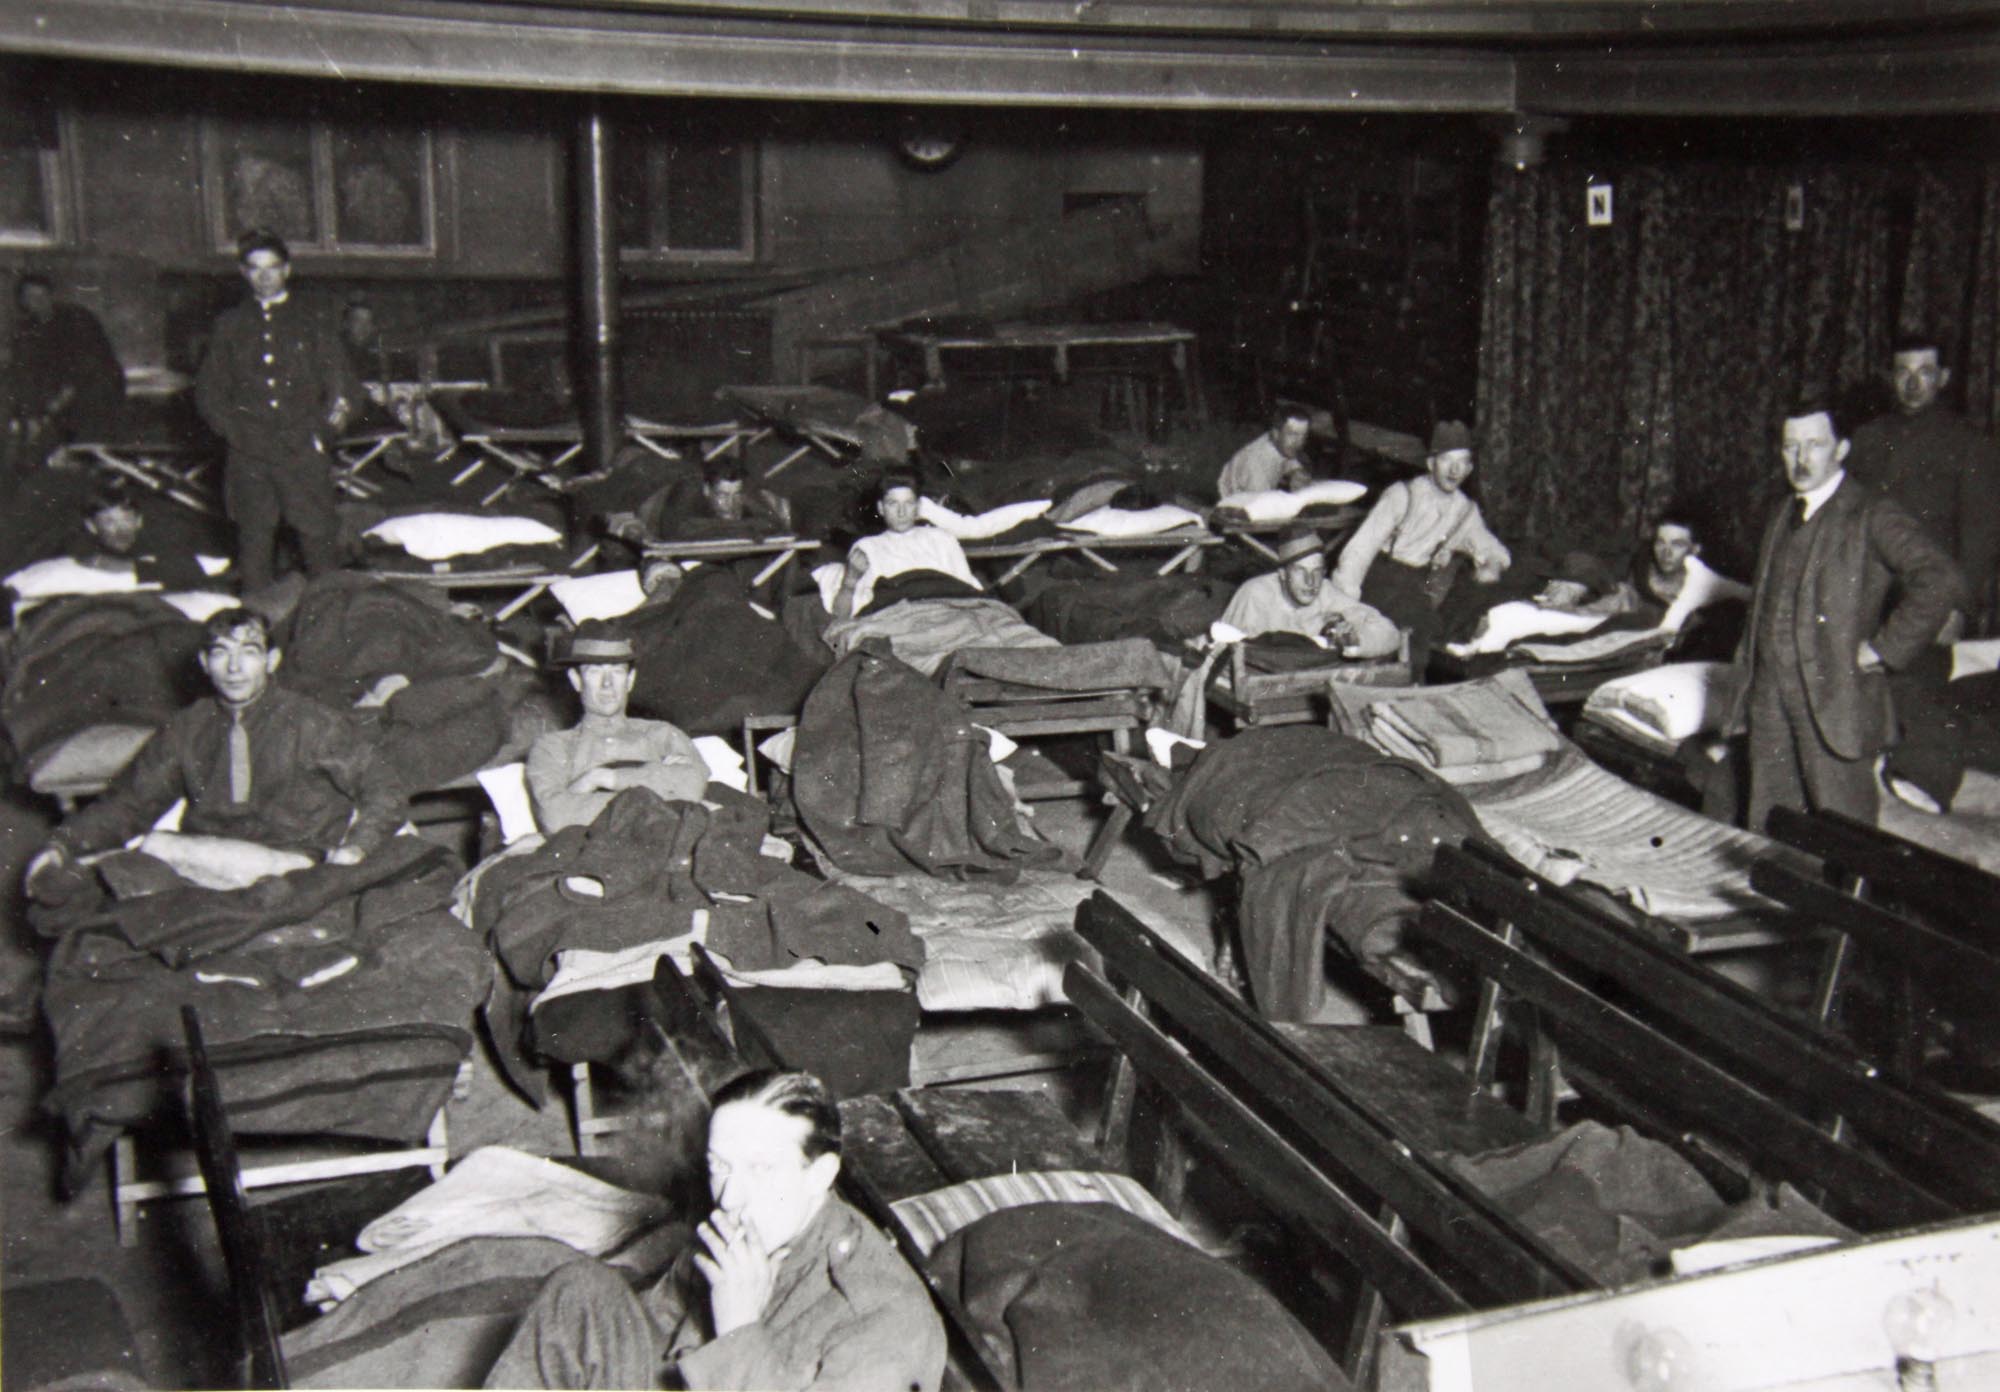 Dormitory for servicemen during WWI - Leicestershire Record Office